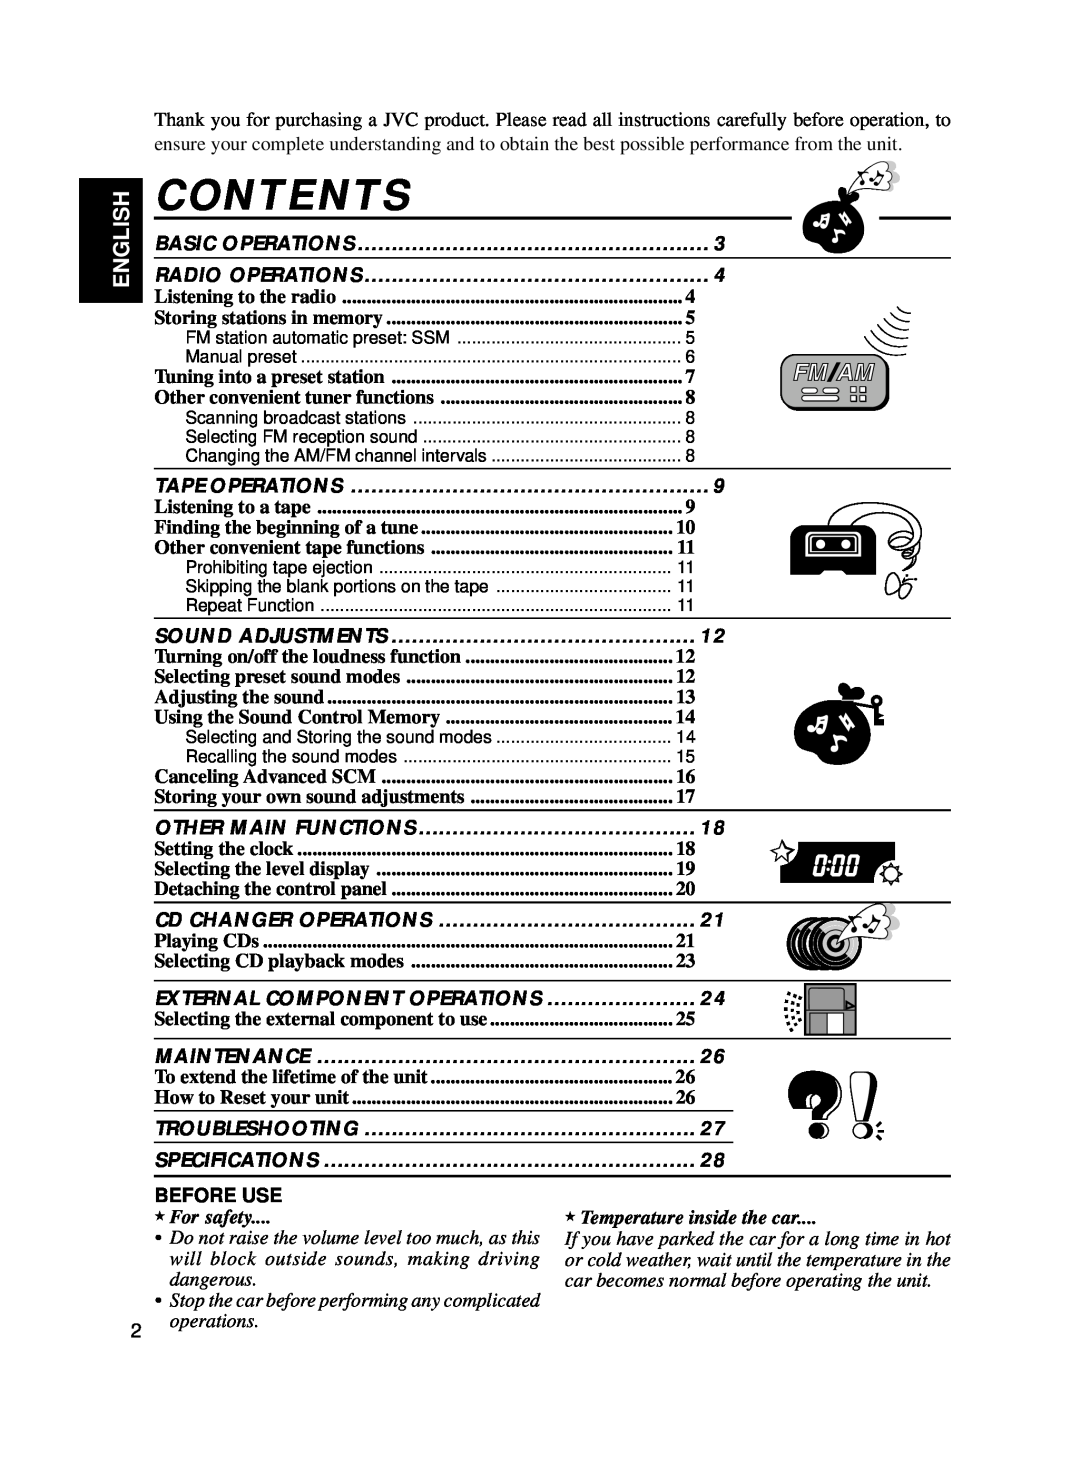 JVC KS-FX250 manual Contents, English, Before Use, For safety, Temperature inside the car 